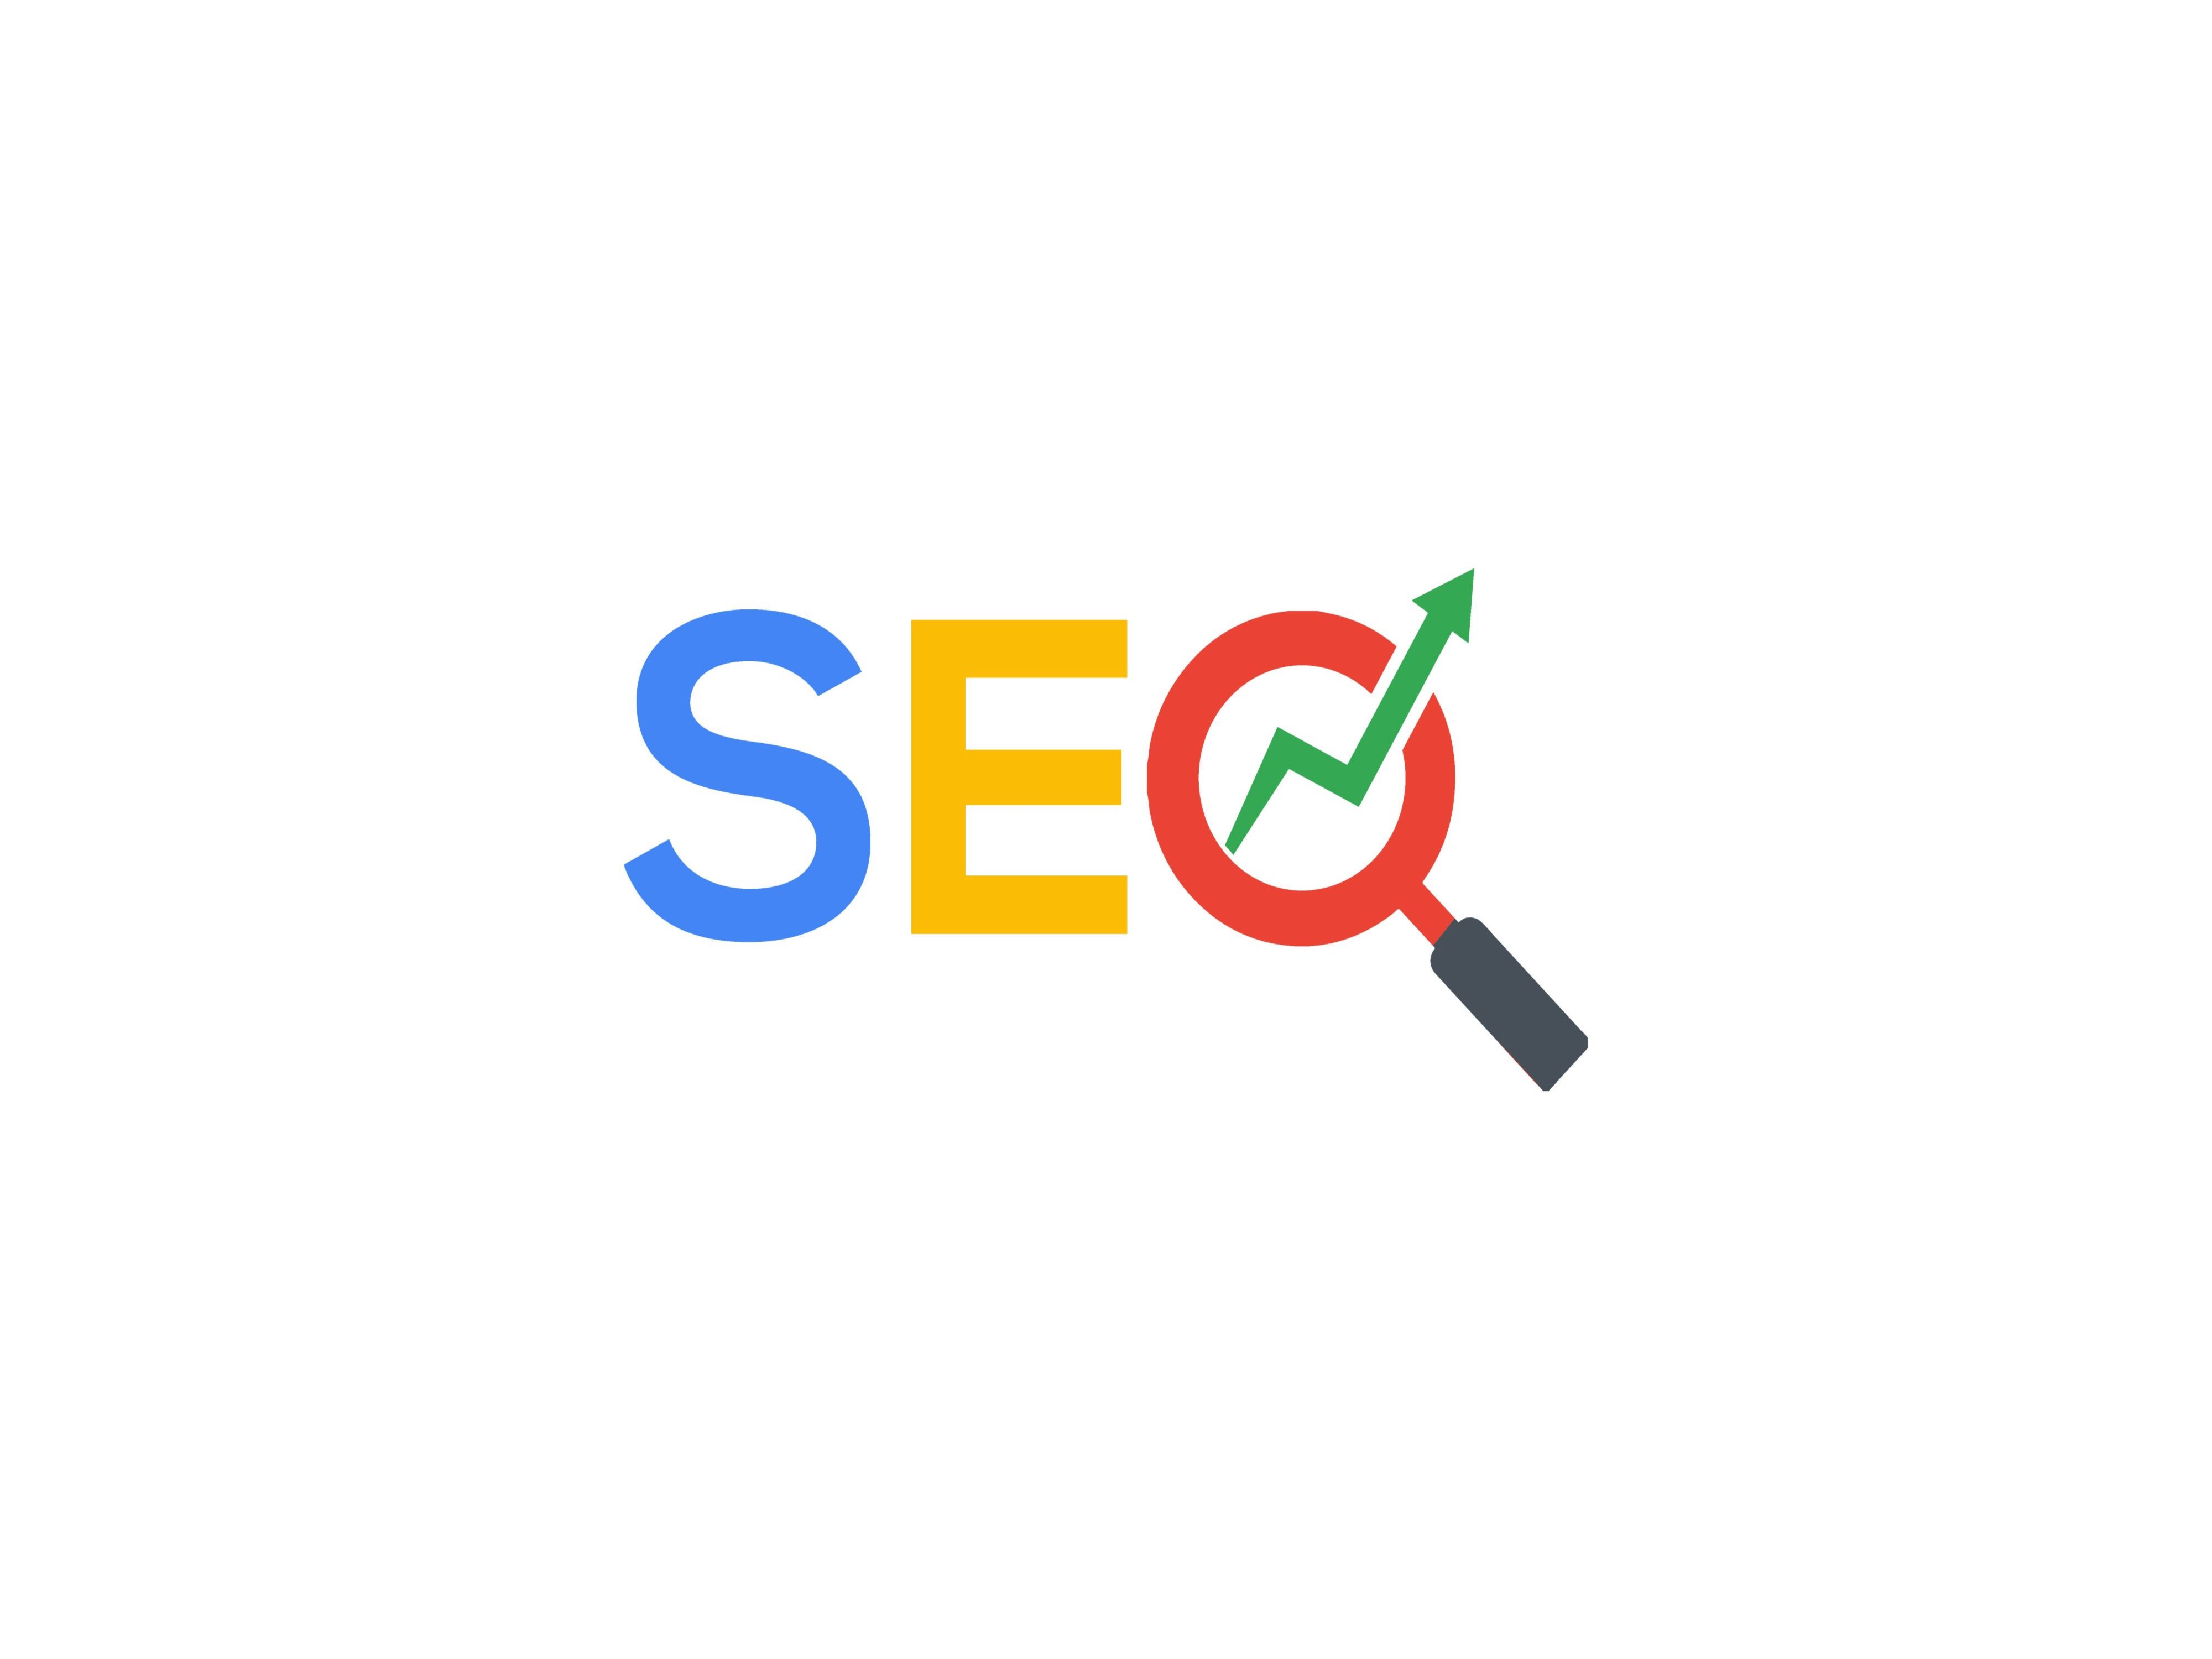 seo_SEO multi color logo with magnifying glass and arrow